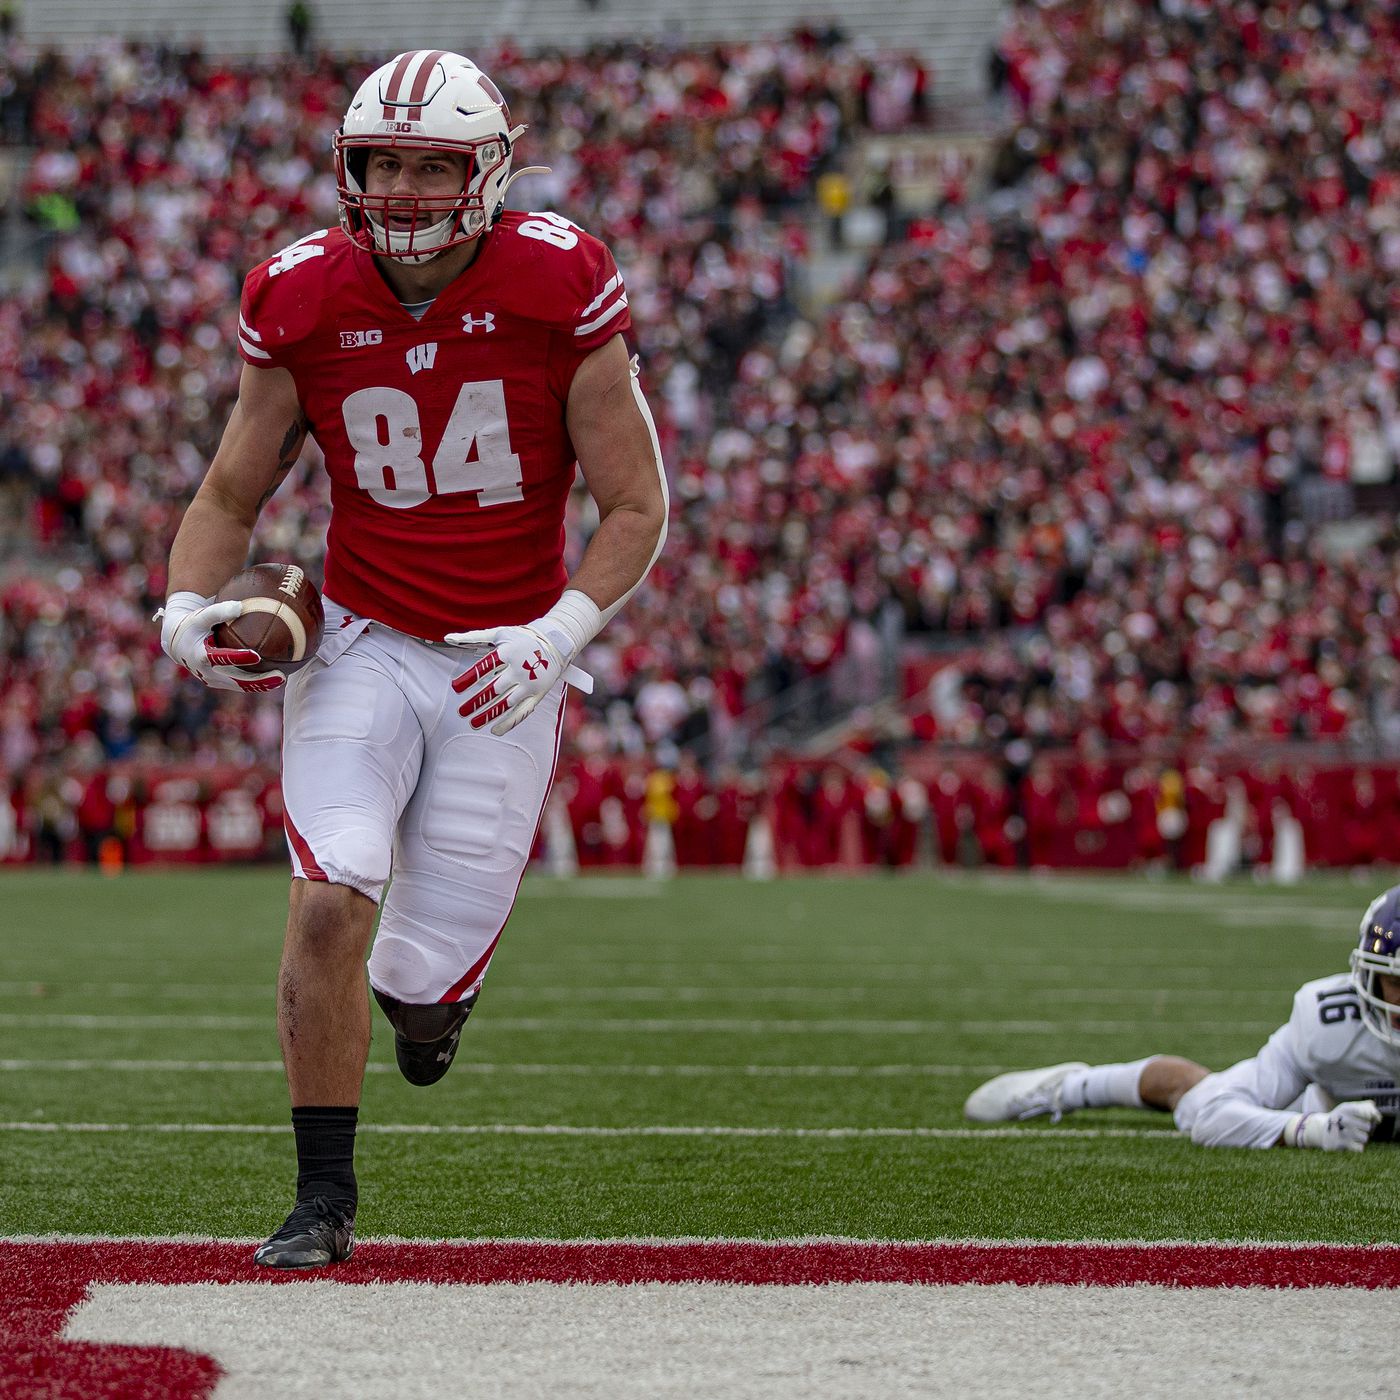 Jake Ferguson scores a touchdown for the Badgers